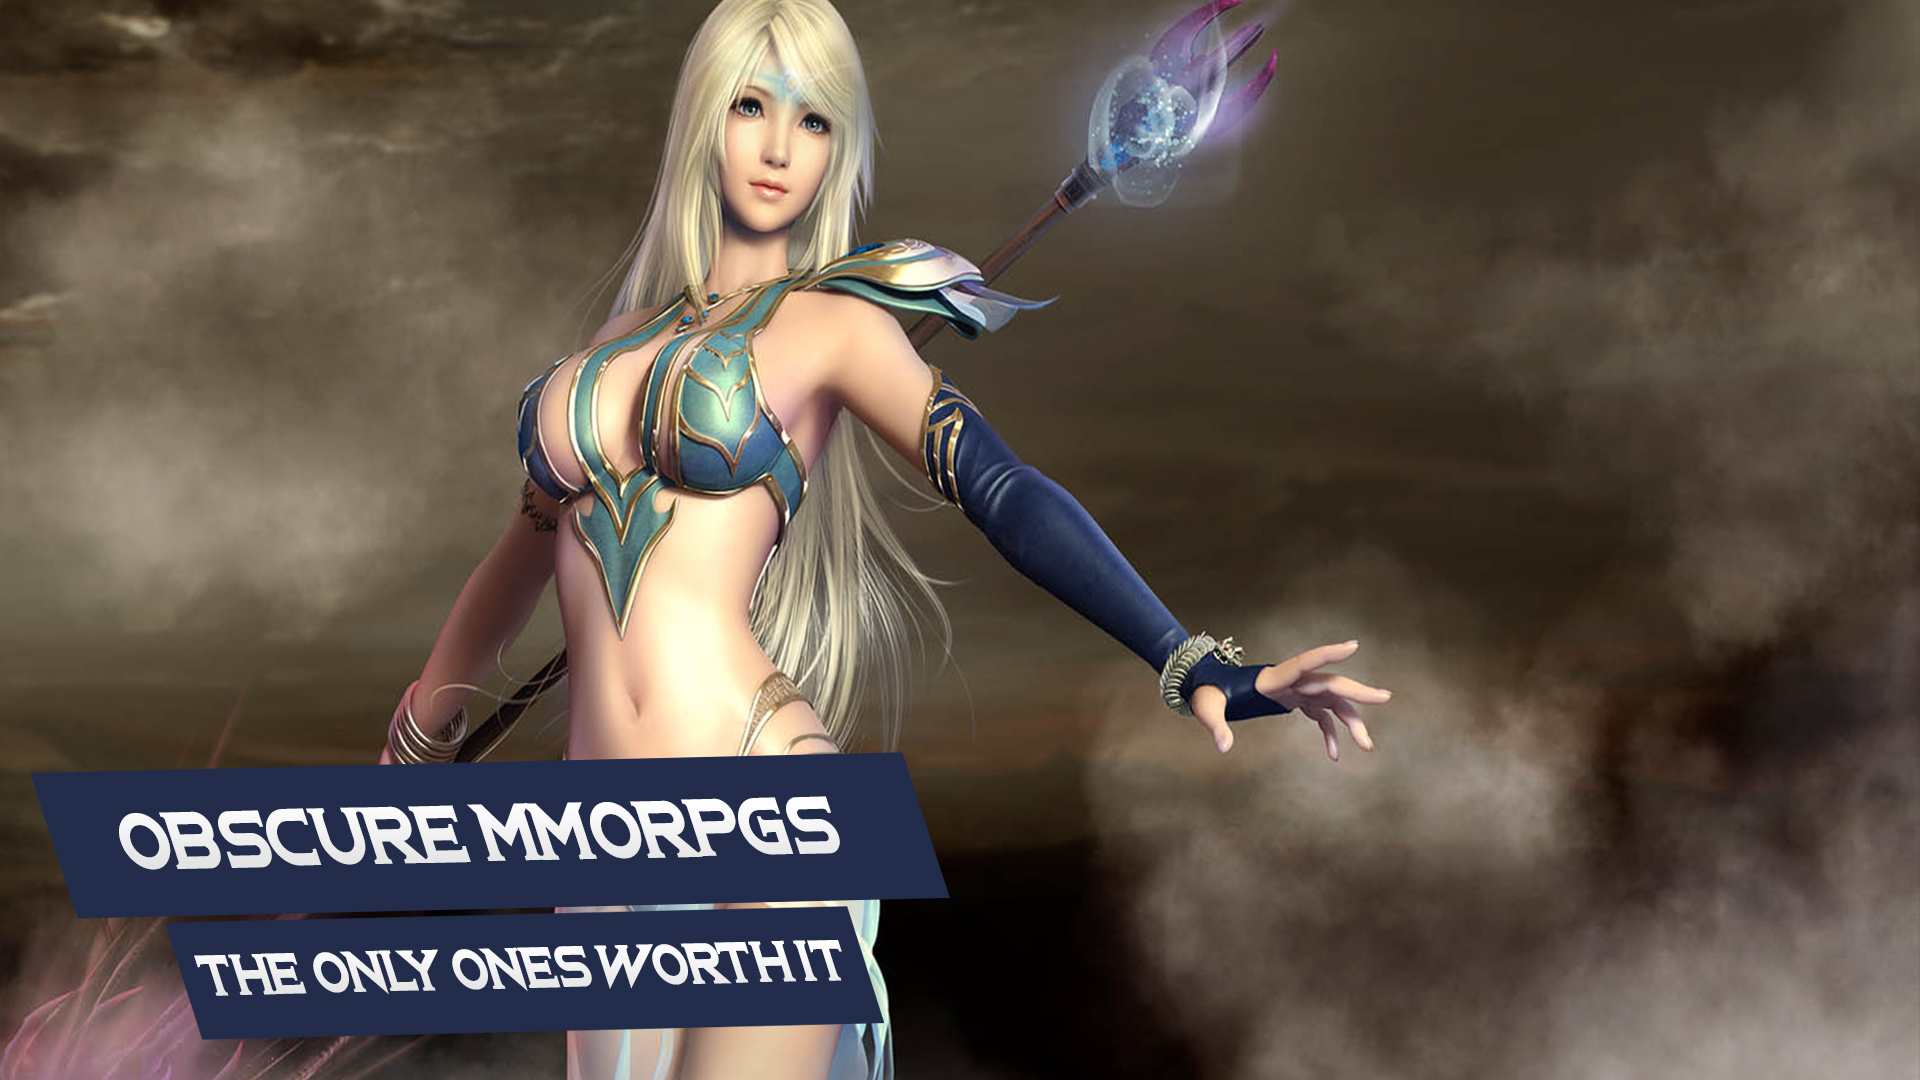 Eddike nøgen besøgende The Top, Best Obscure MMORPGs You Have To Try Before They're Gone!